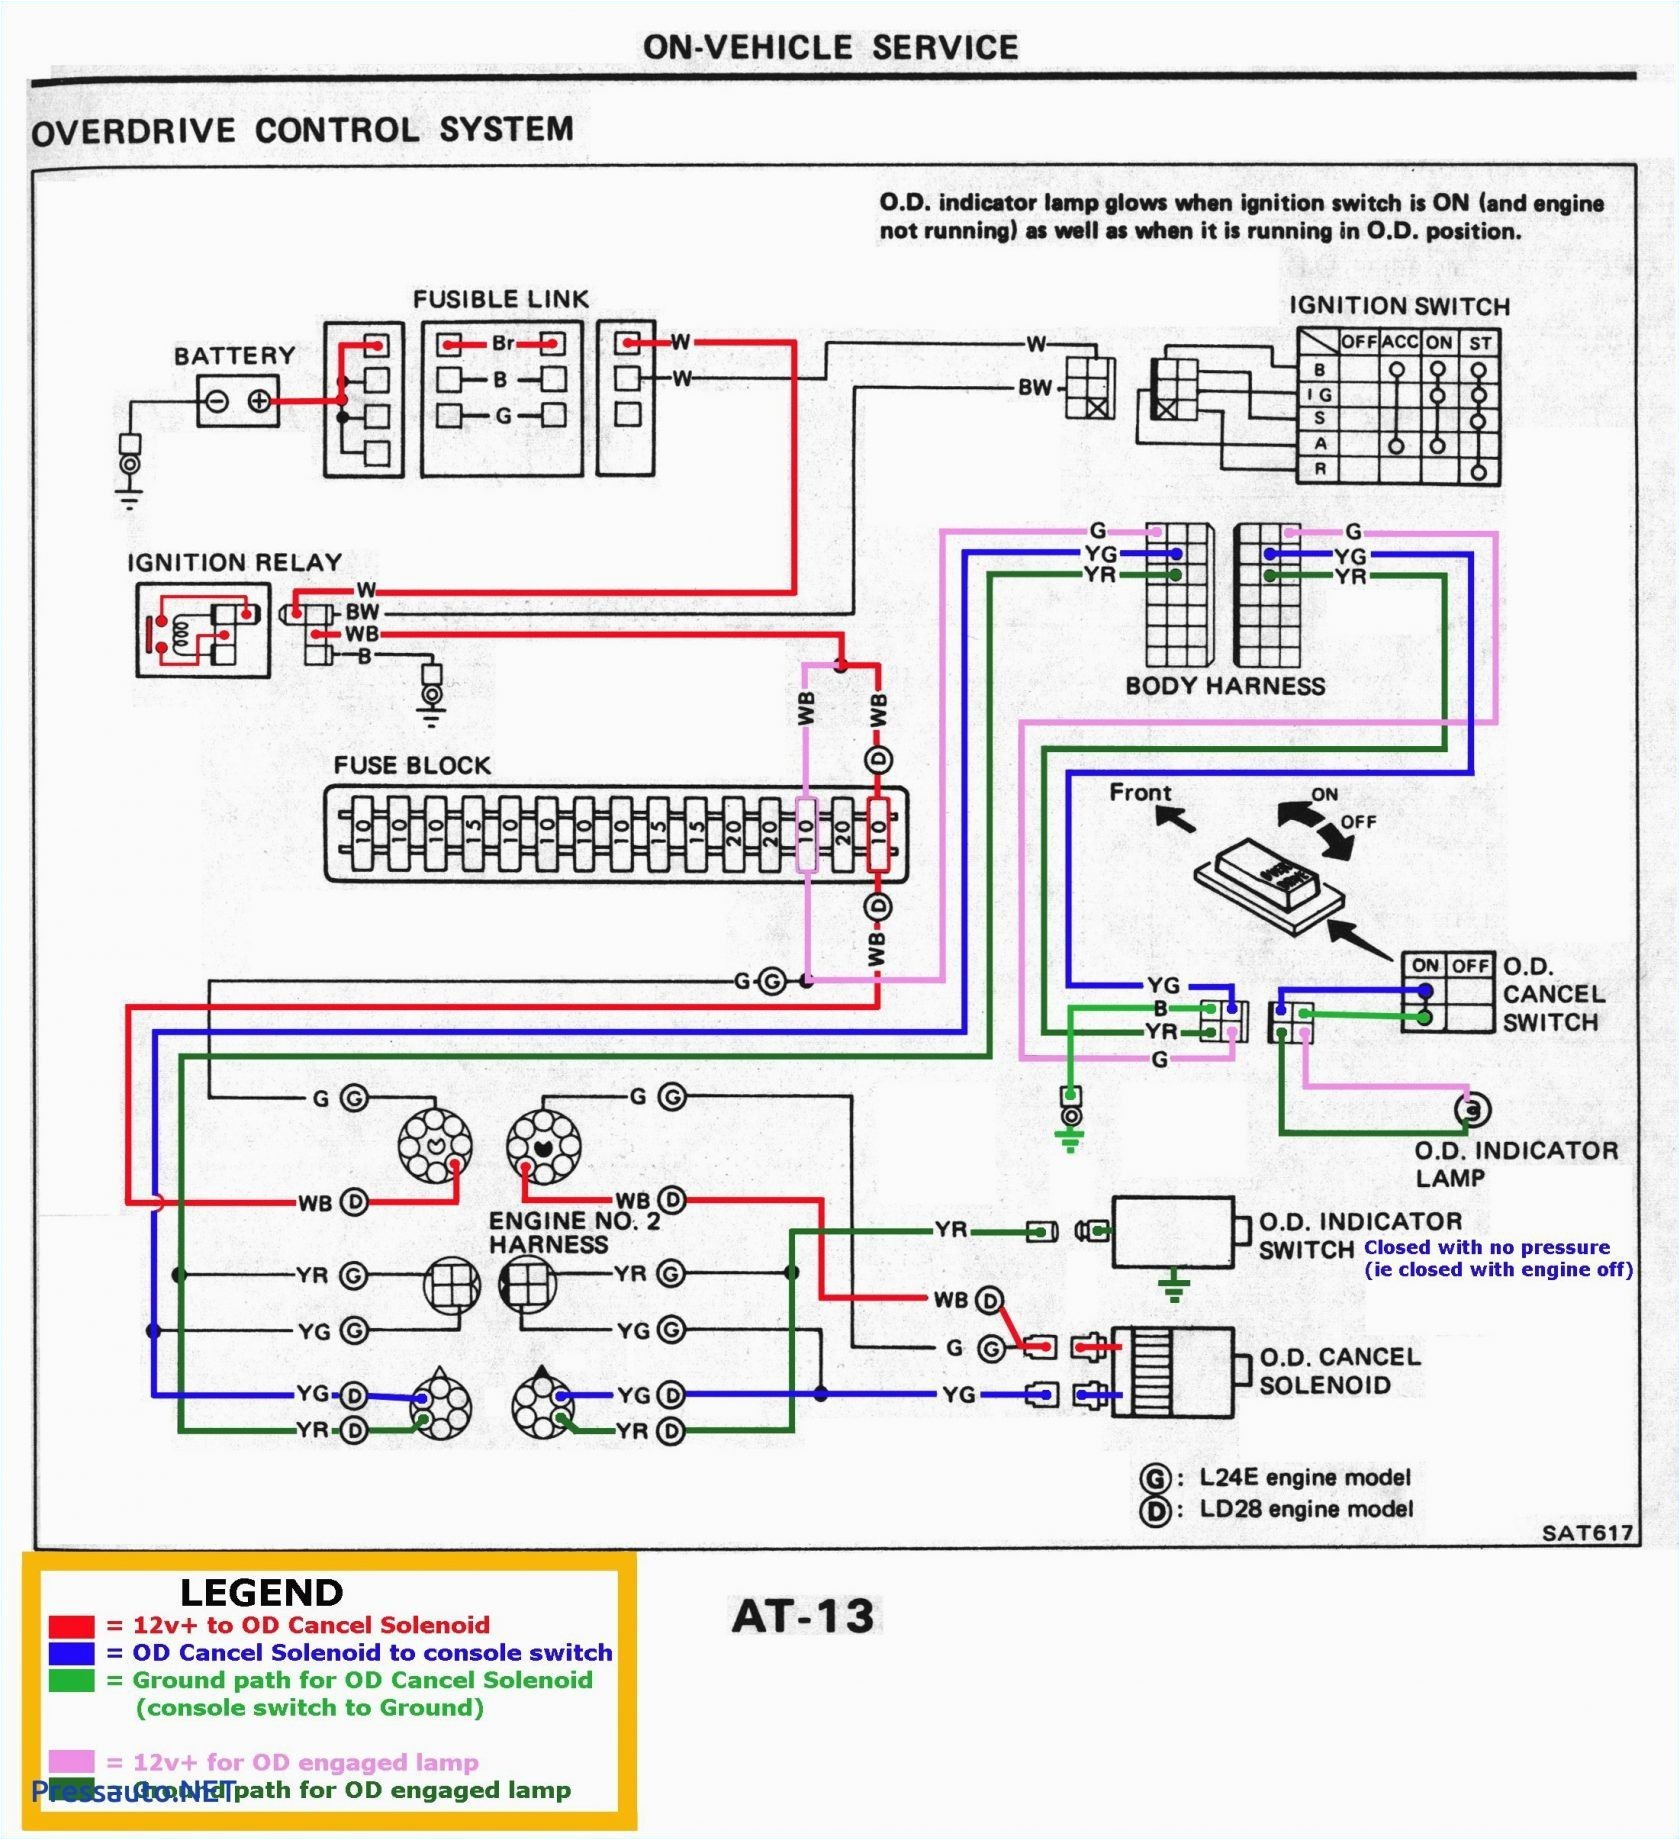 Power Lift Jack Plate Wiring Diagram Diagram Relay Wiring Switch Ccg900g Wiring Diagram